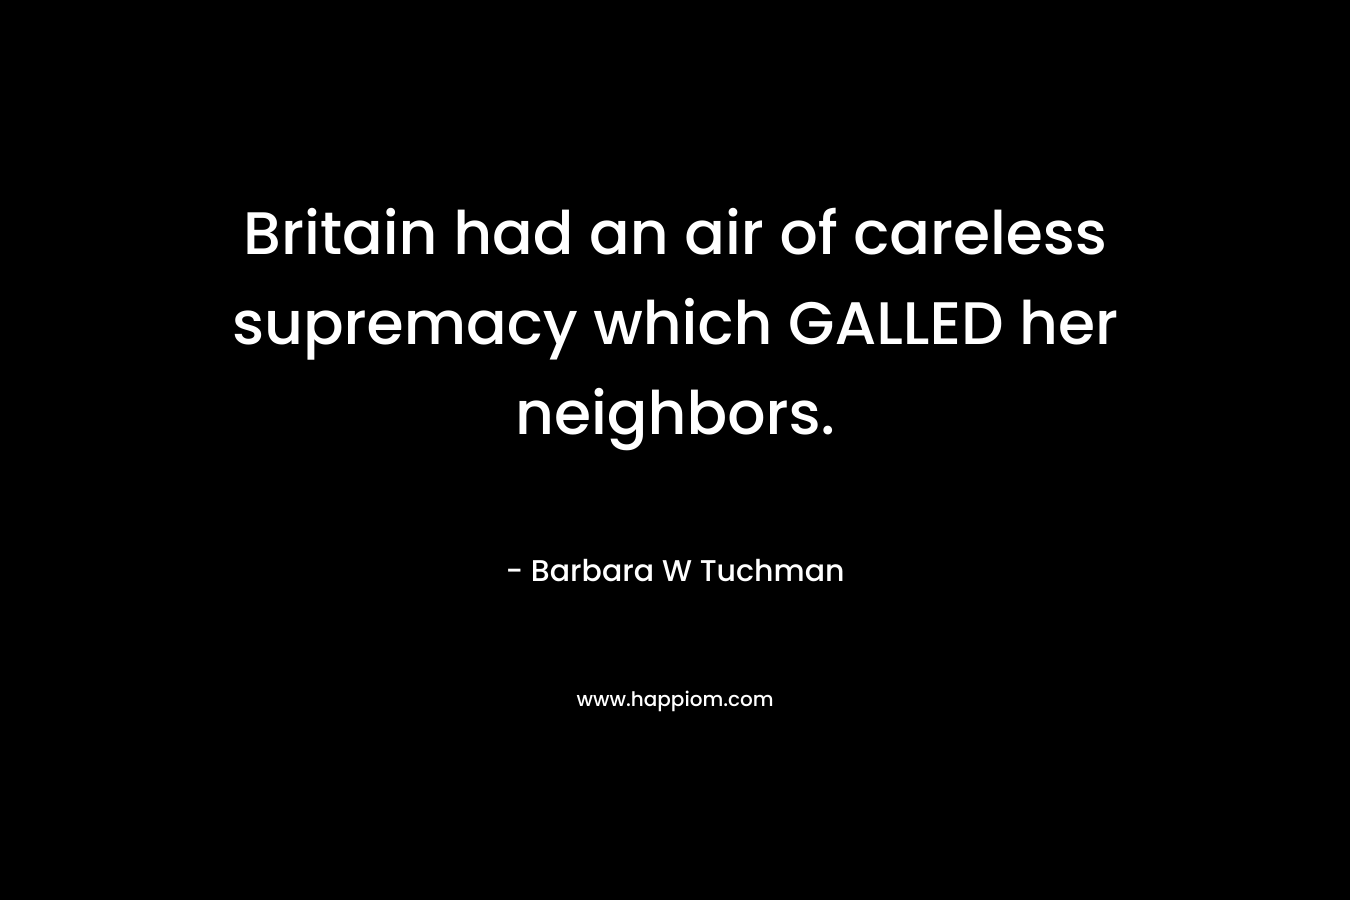 Britain had an air of careless supremacy which GALLED her neighbors.